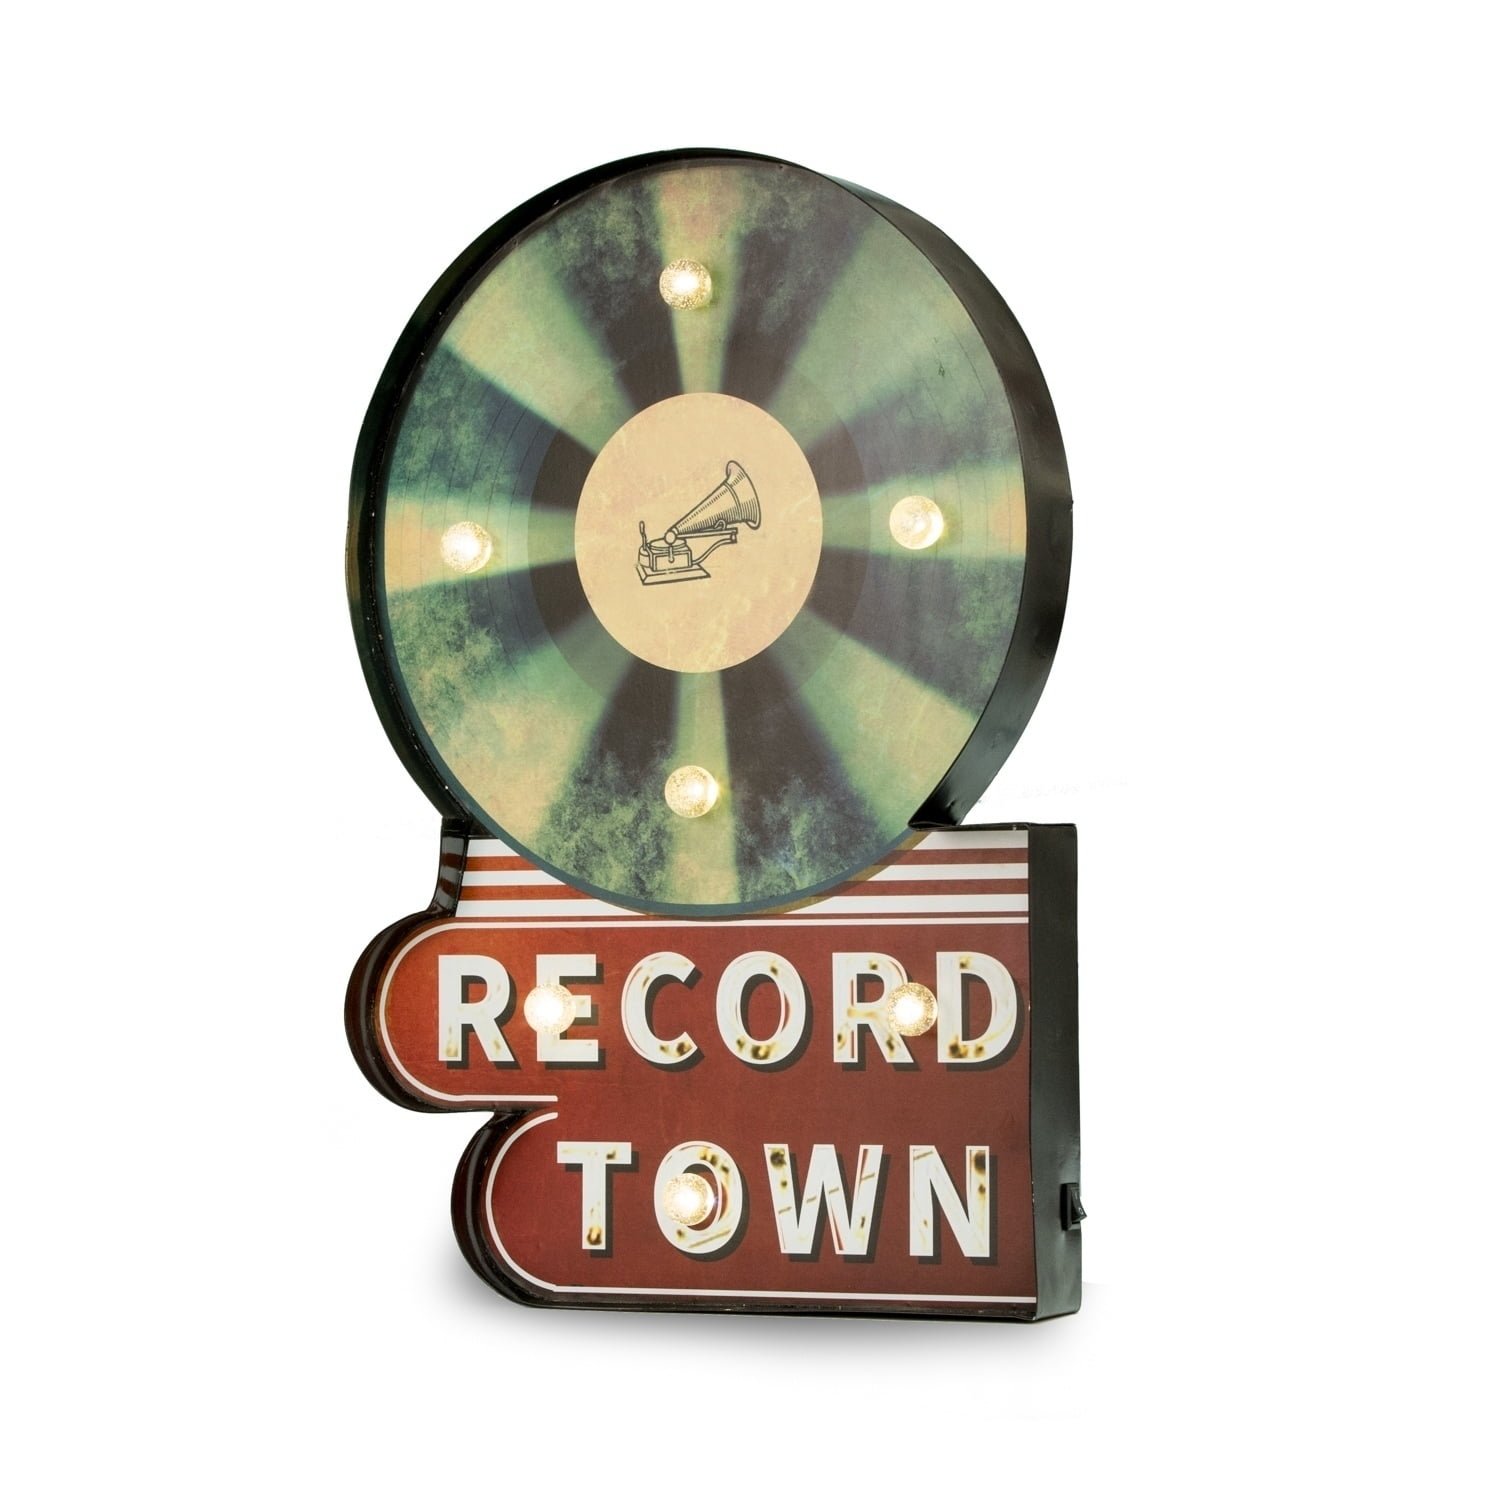 Bey-berk International Wd509 Record Town Led Lighted Metal Sign - Multi Color